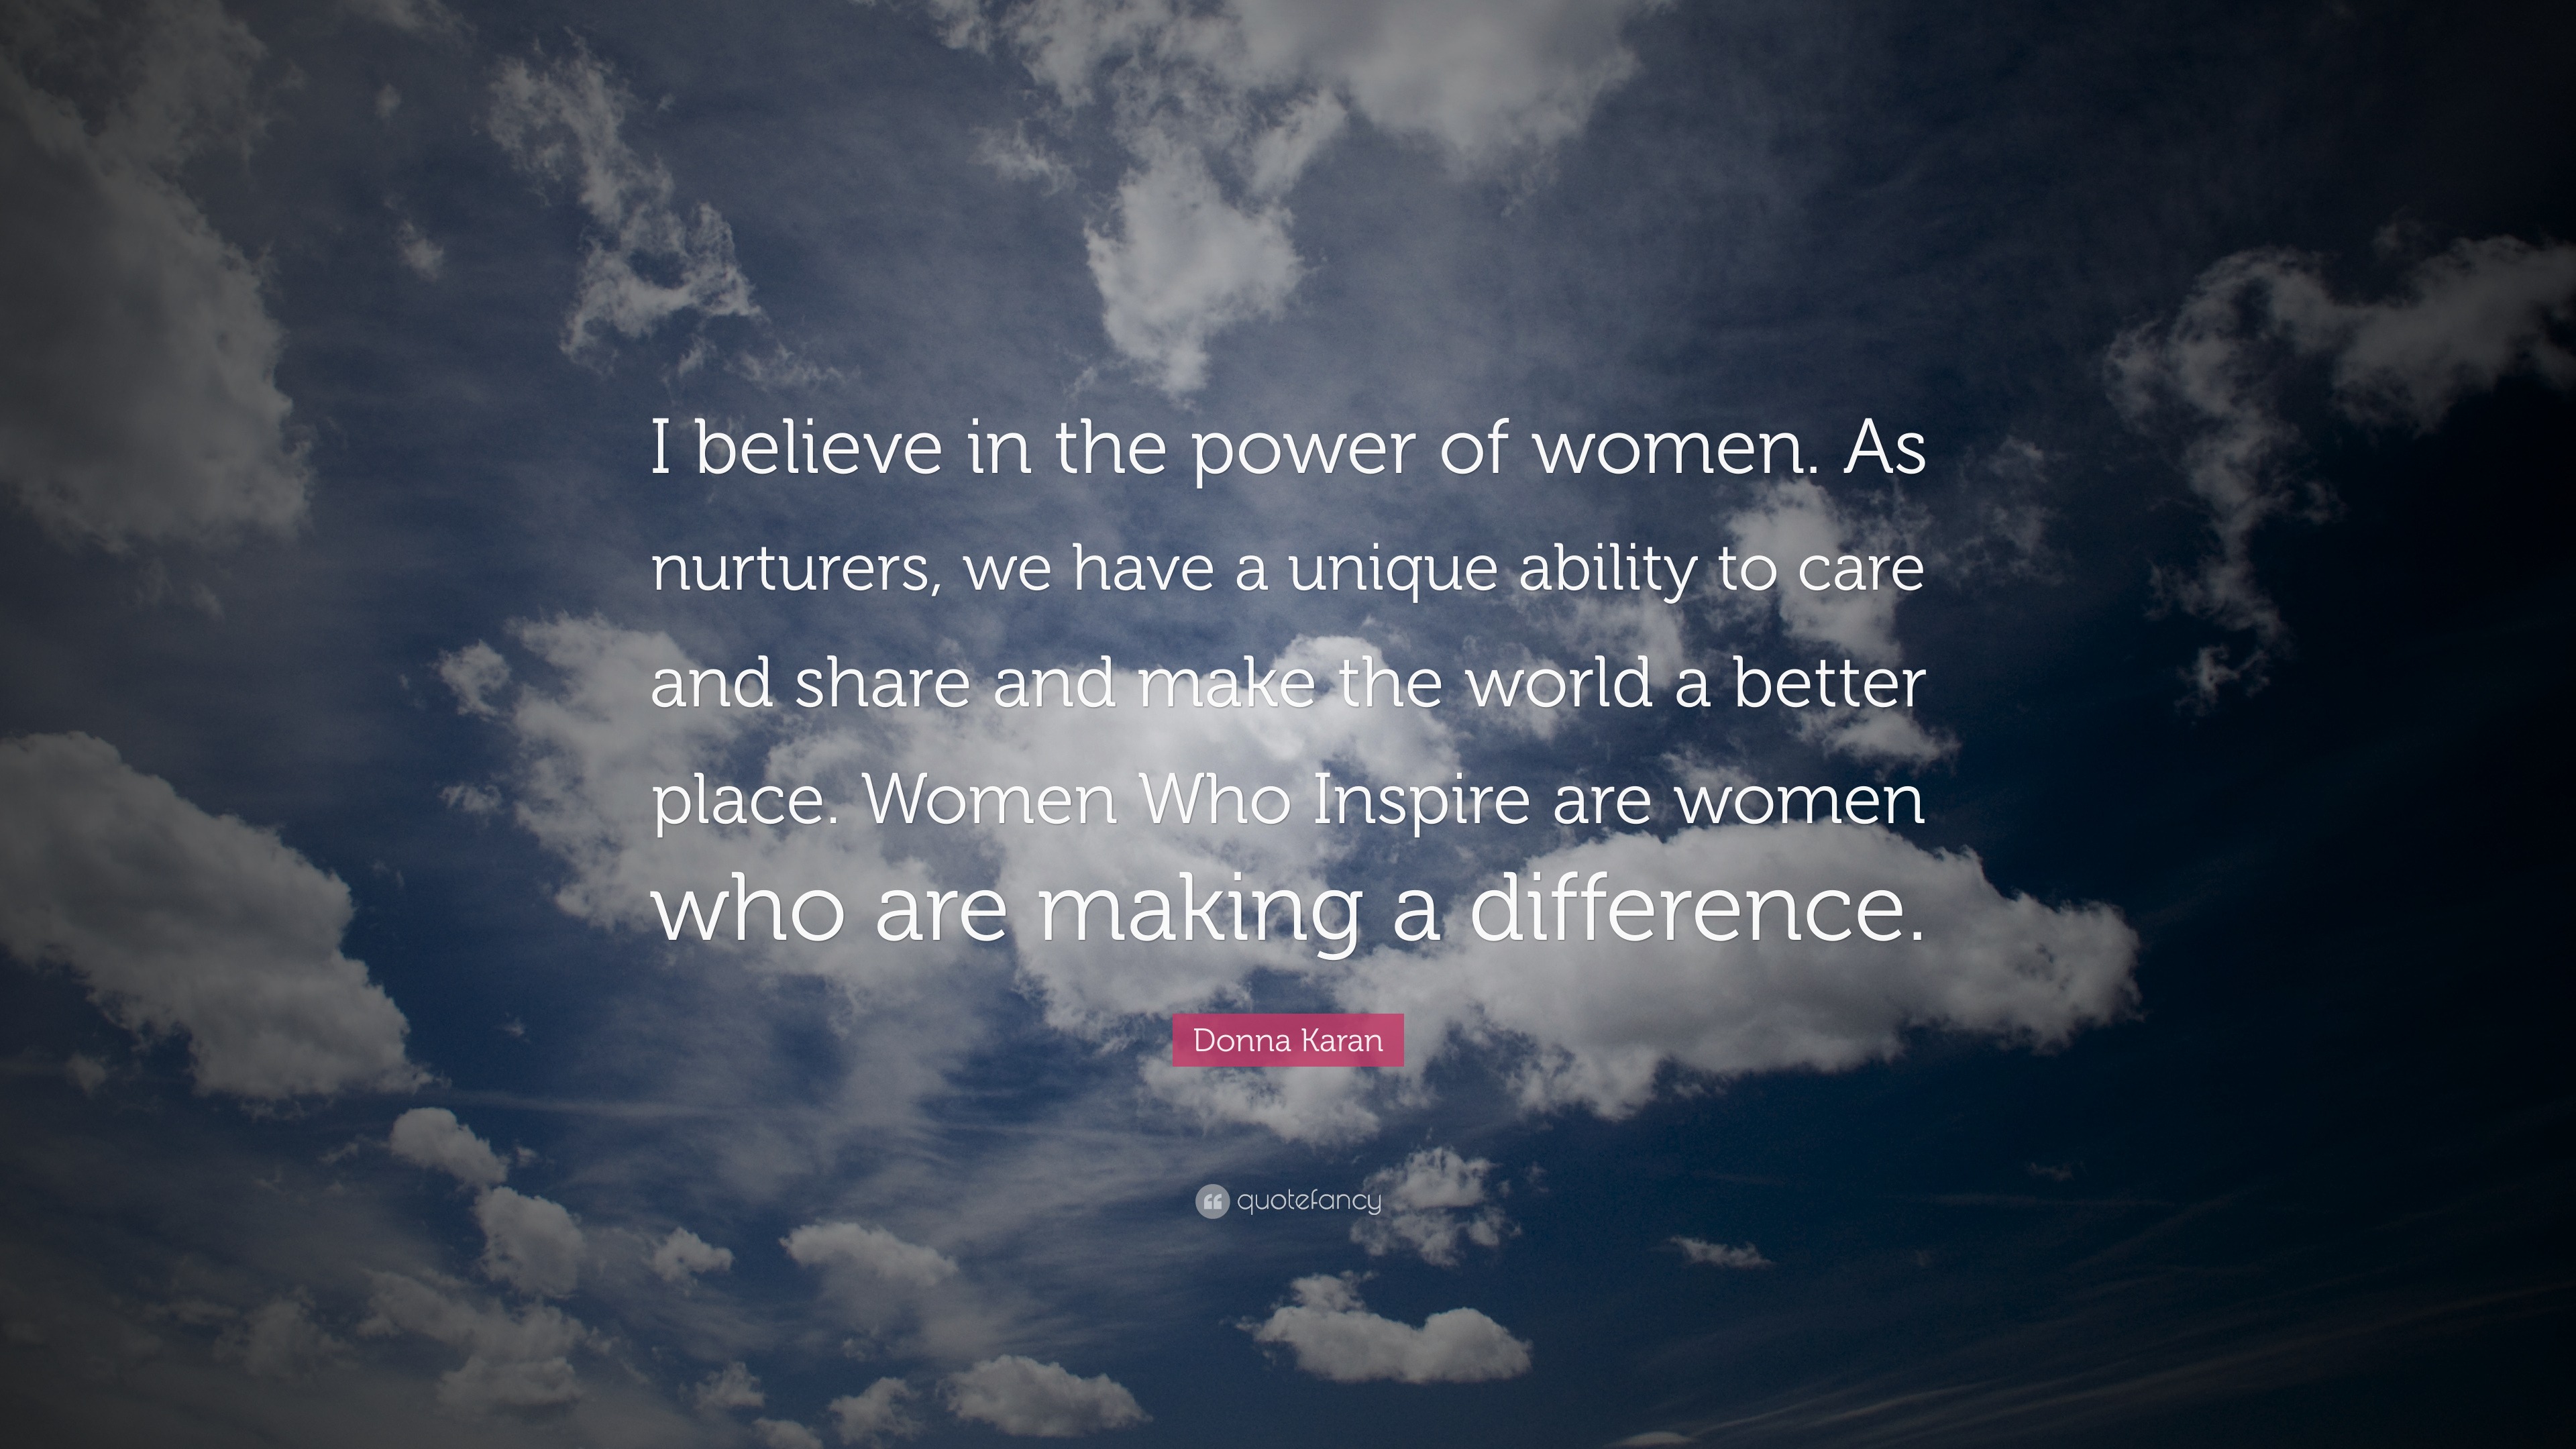 Donna Karan Quote: “I believe in the power of women. As nurturers, we have  a unique ability to care and share and make the world a better pl...”